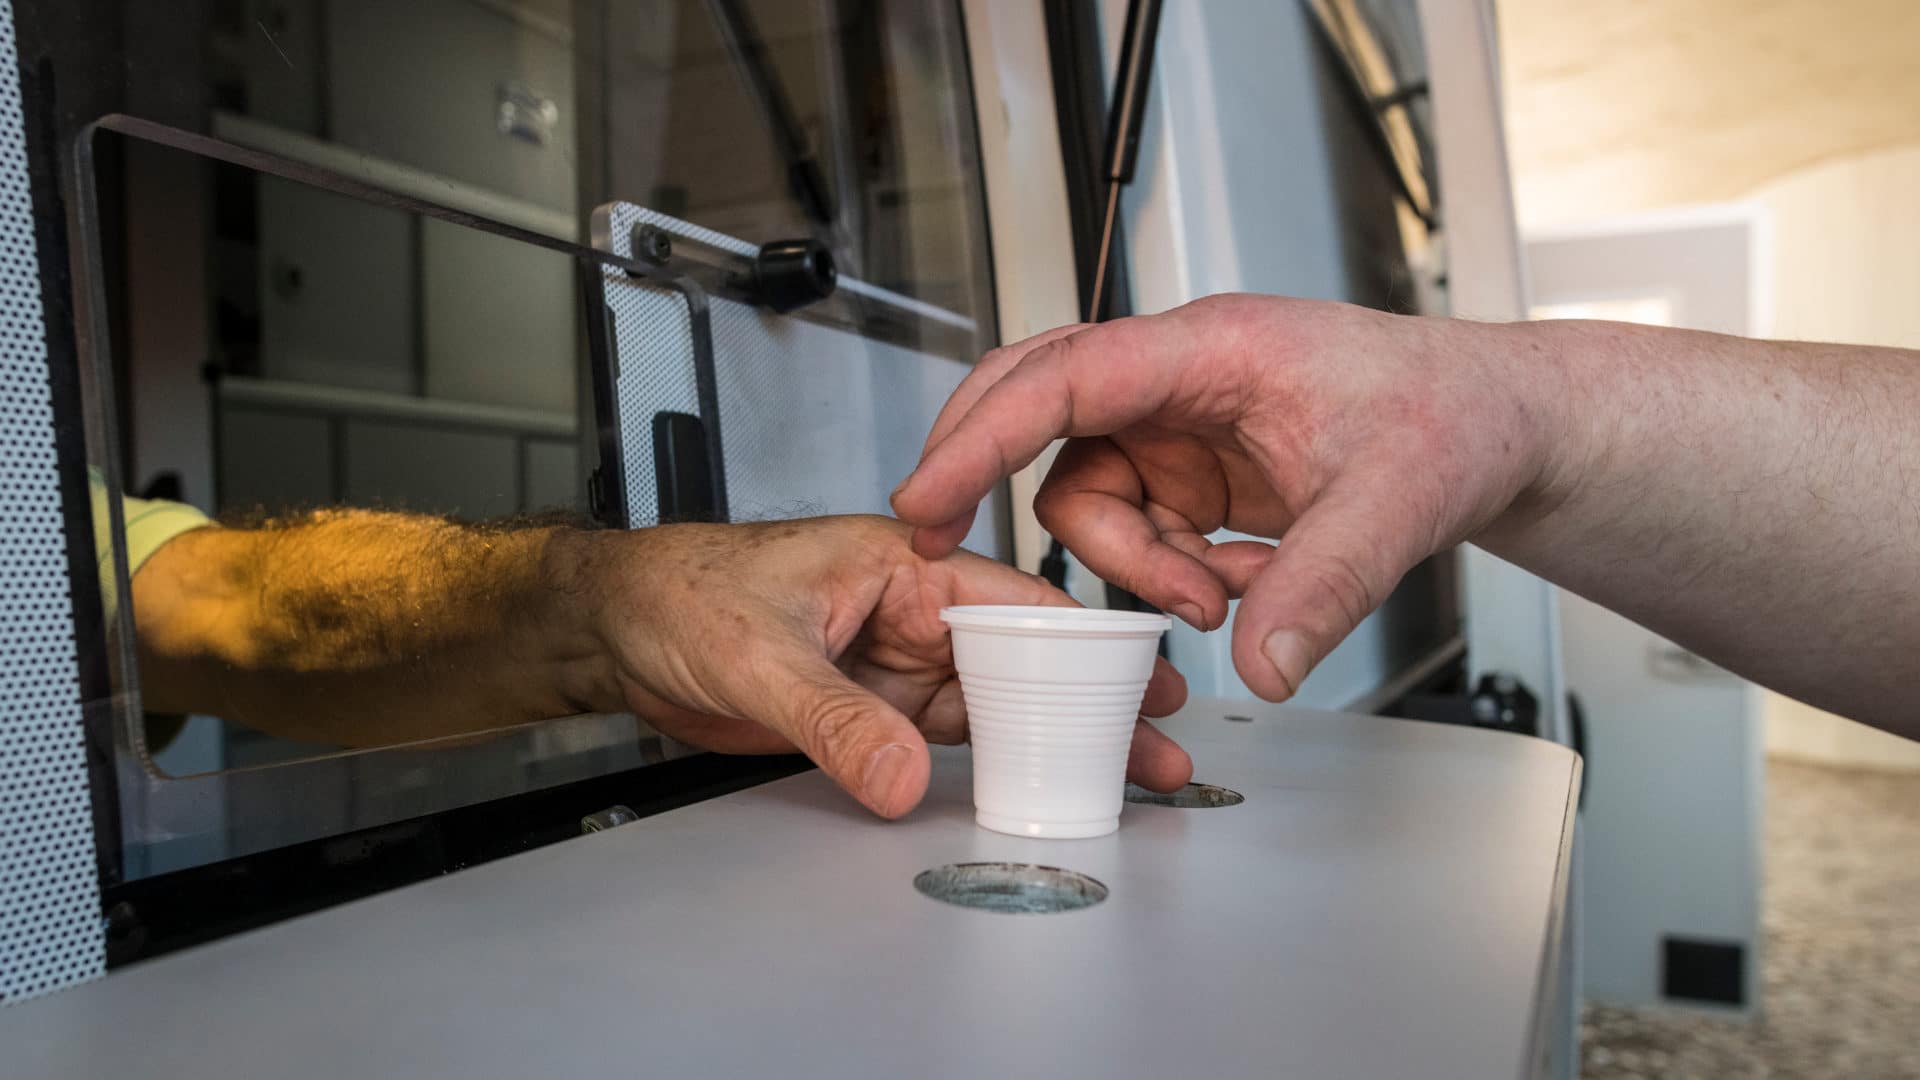 In Lisbon, Portugal, a daily methadone program distributes the drug to patients from a van. The program, run by the Ares do Pinhal Association for Social Inclusion, is part of Portugal's radical decriminalization of drug use.